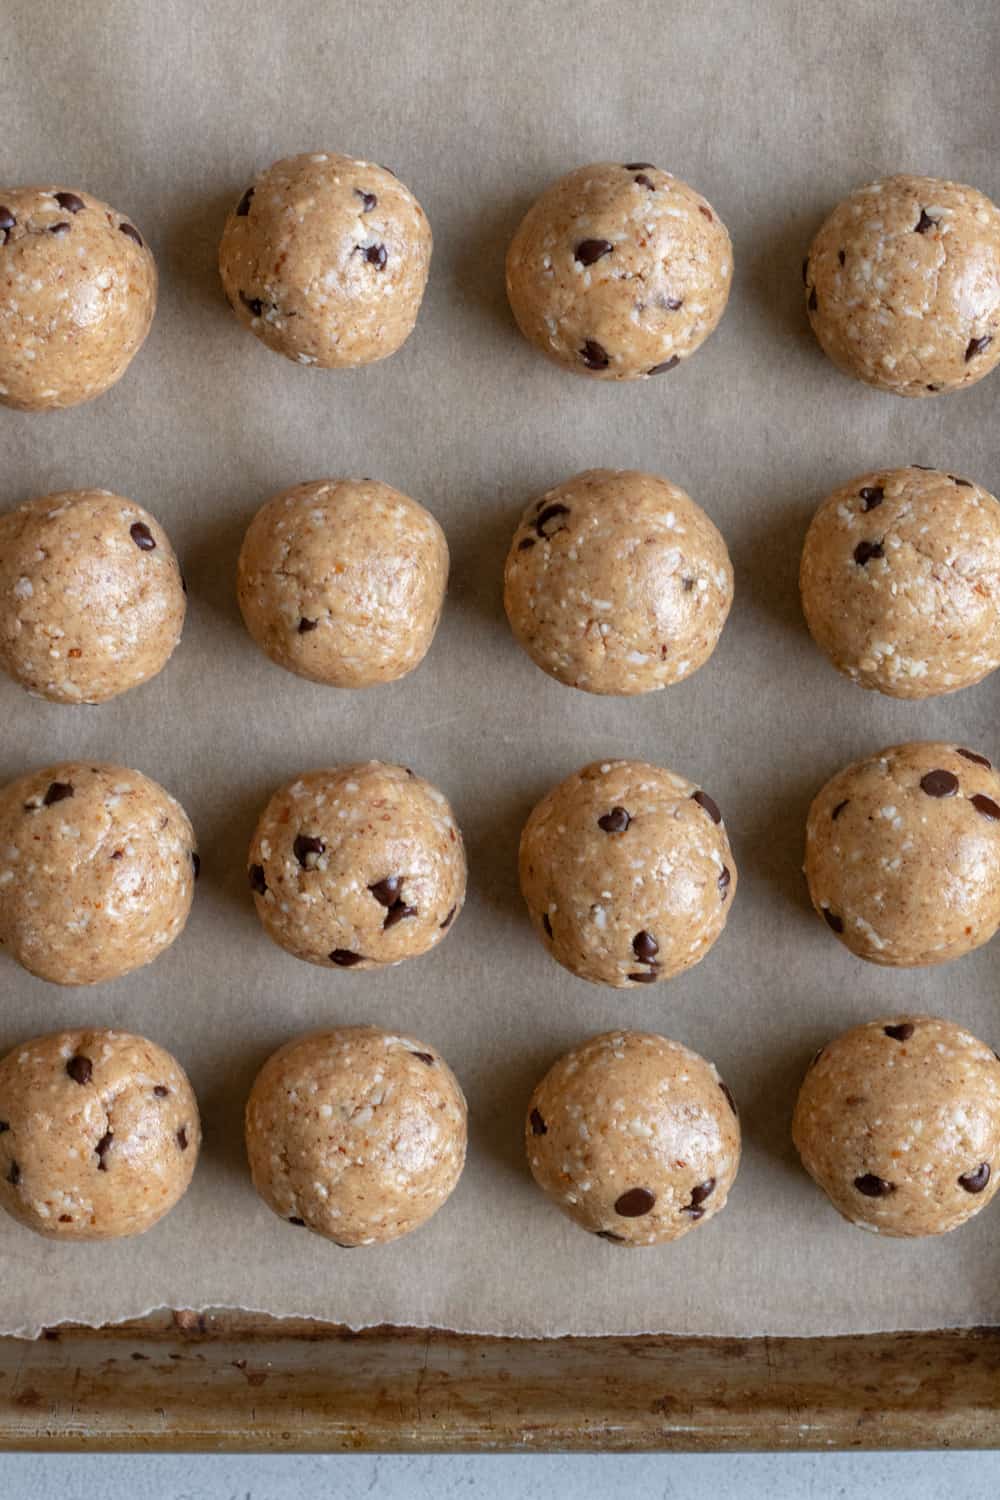 homemade coconut-almond energy balls on parchment paper.